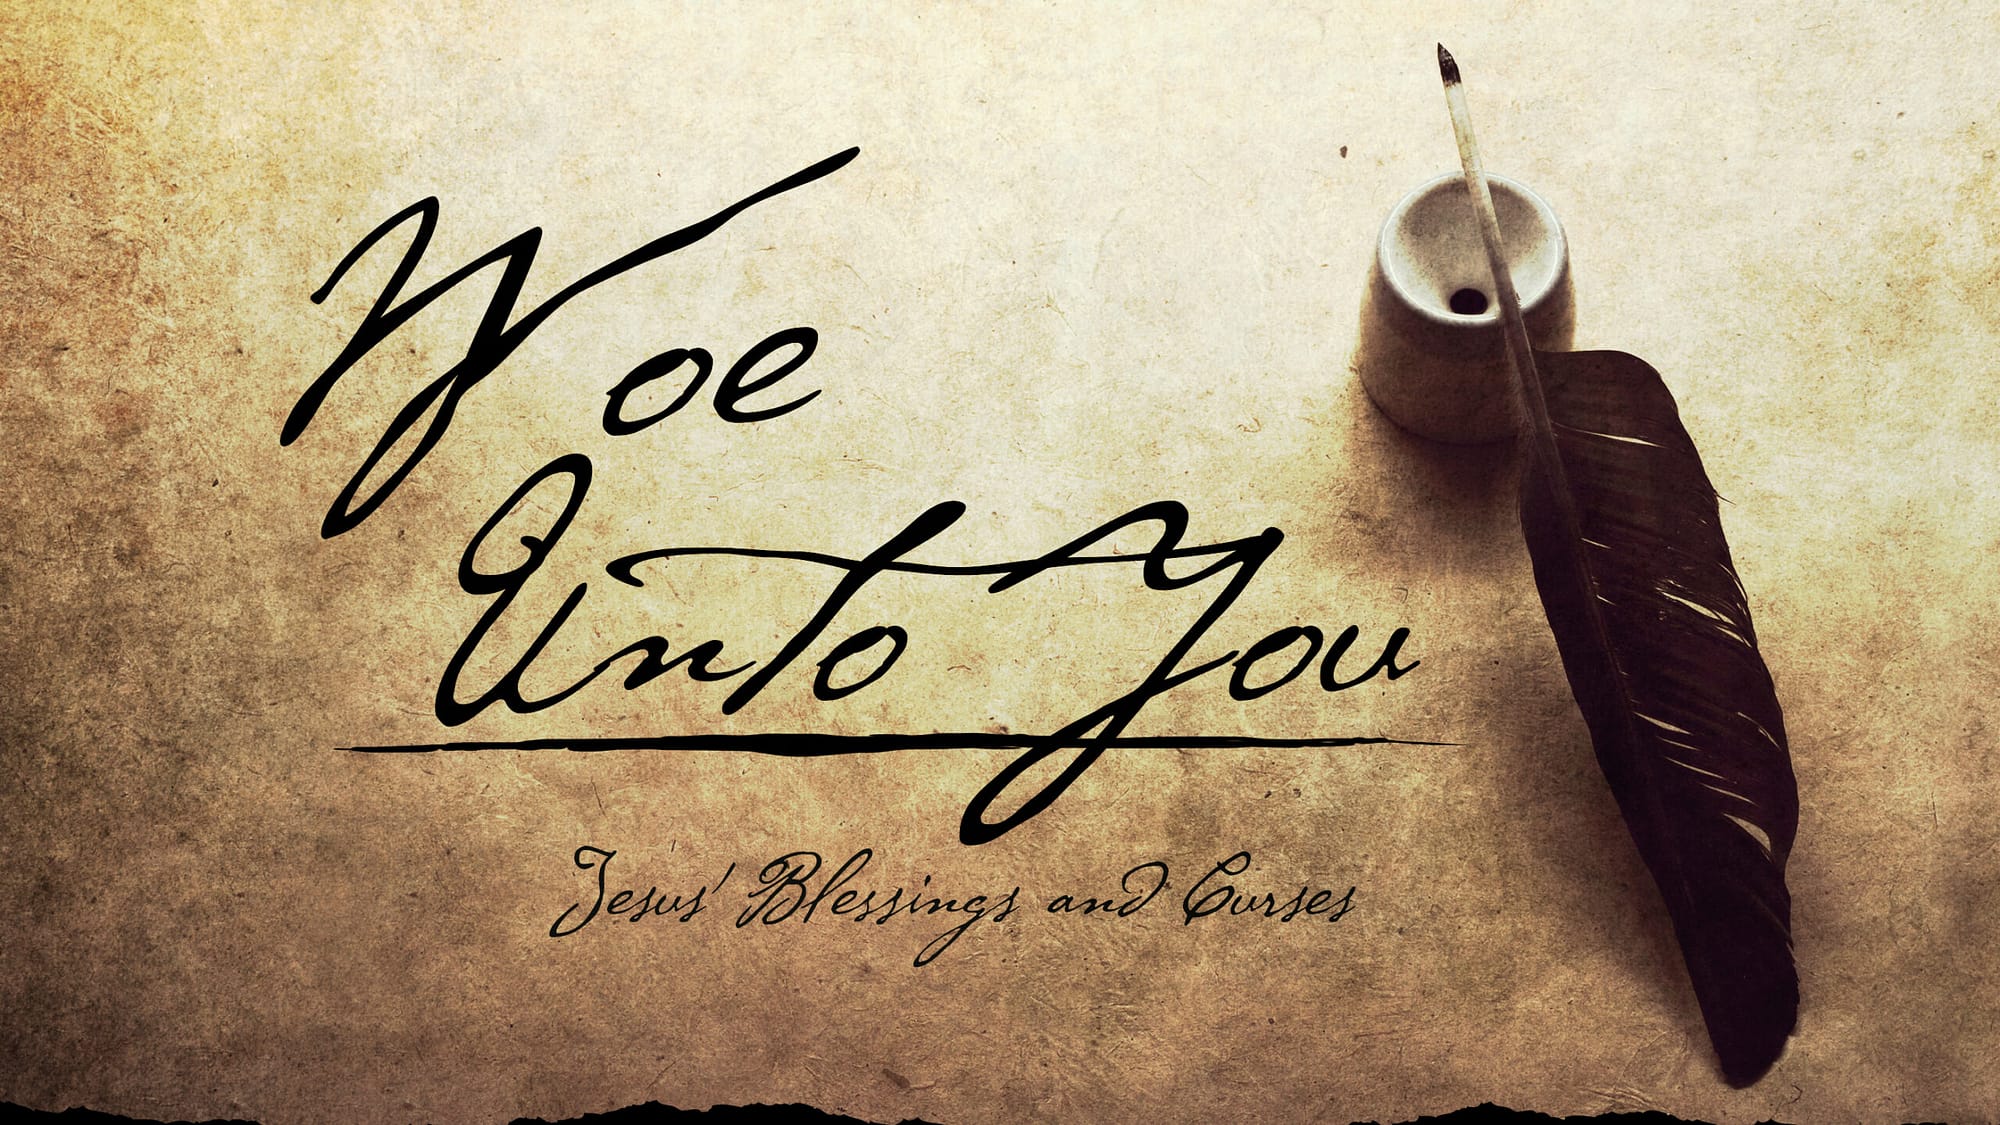 Woe Unto You – Jesus’ Blessings and Curses